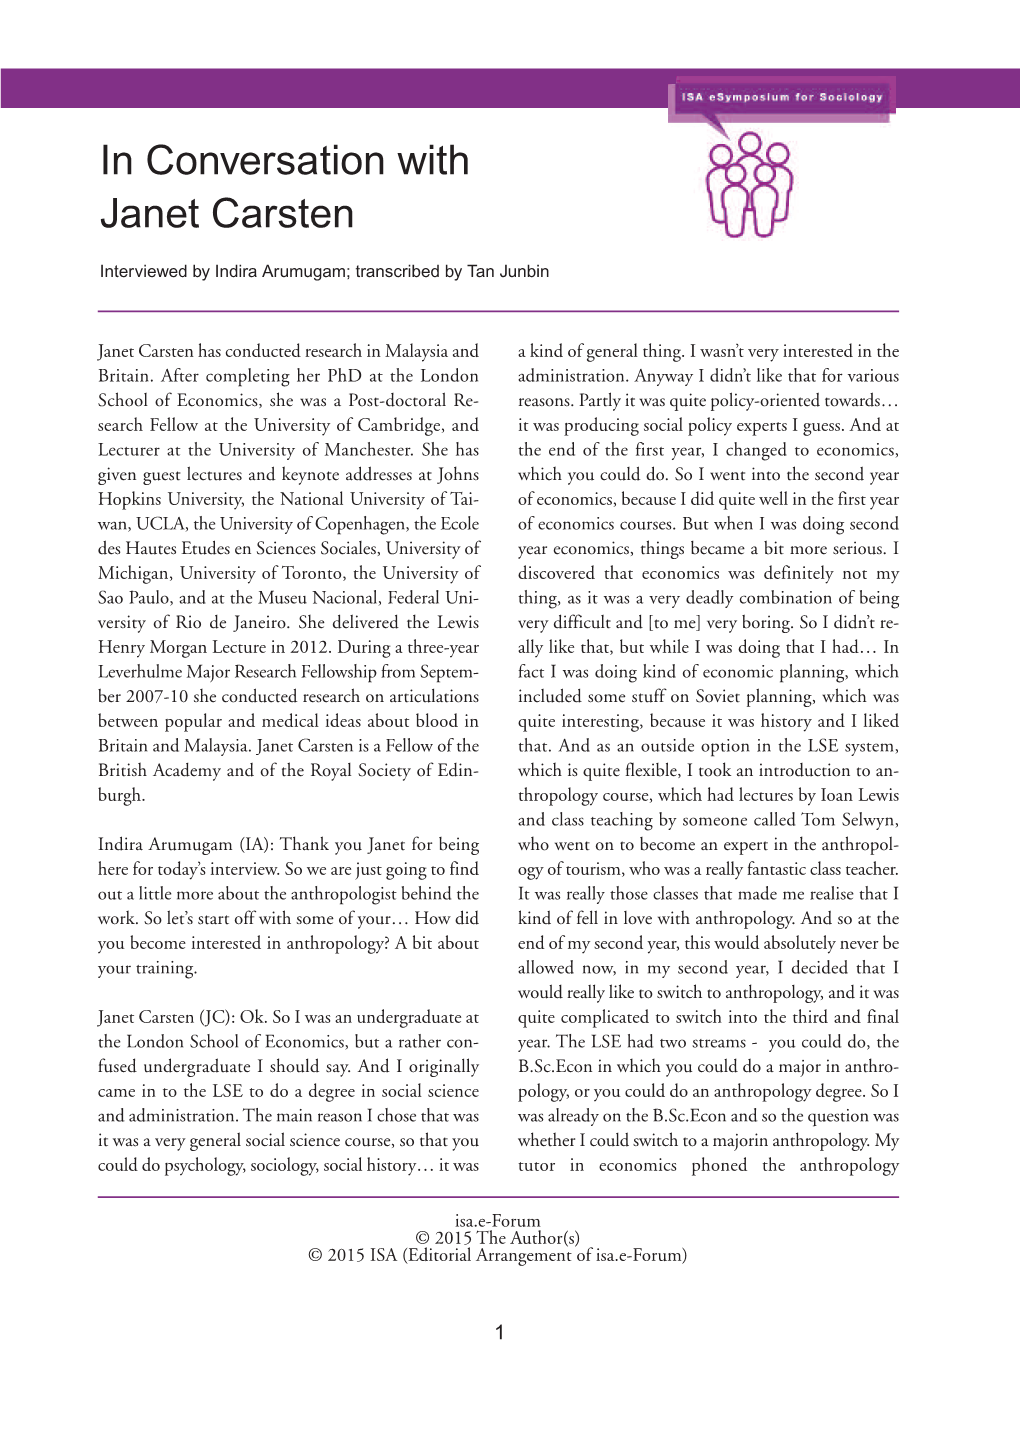 In Conversation with Janet Carsten